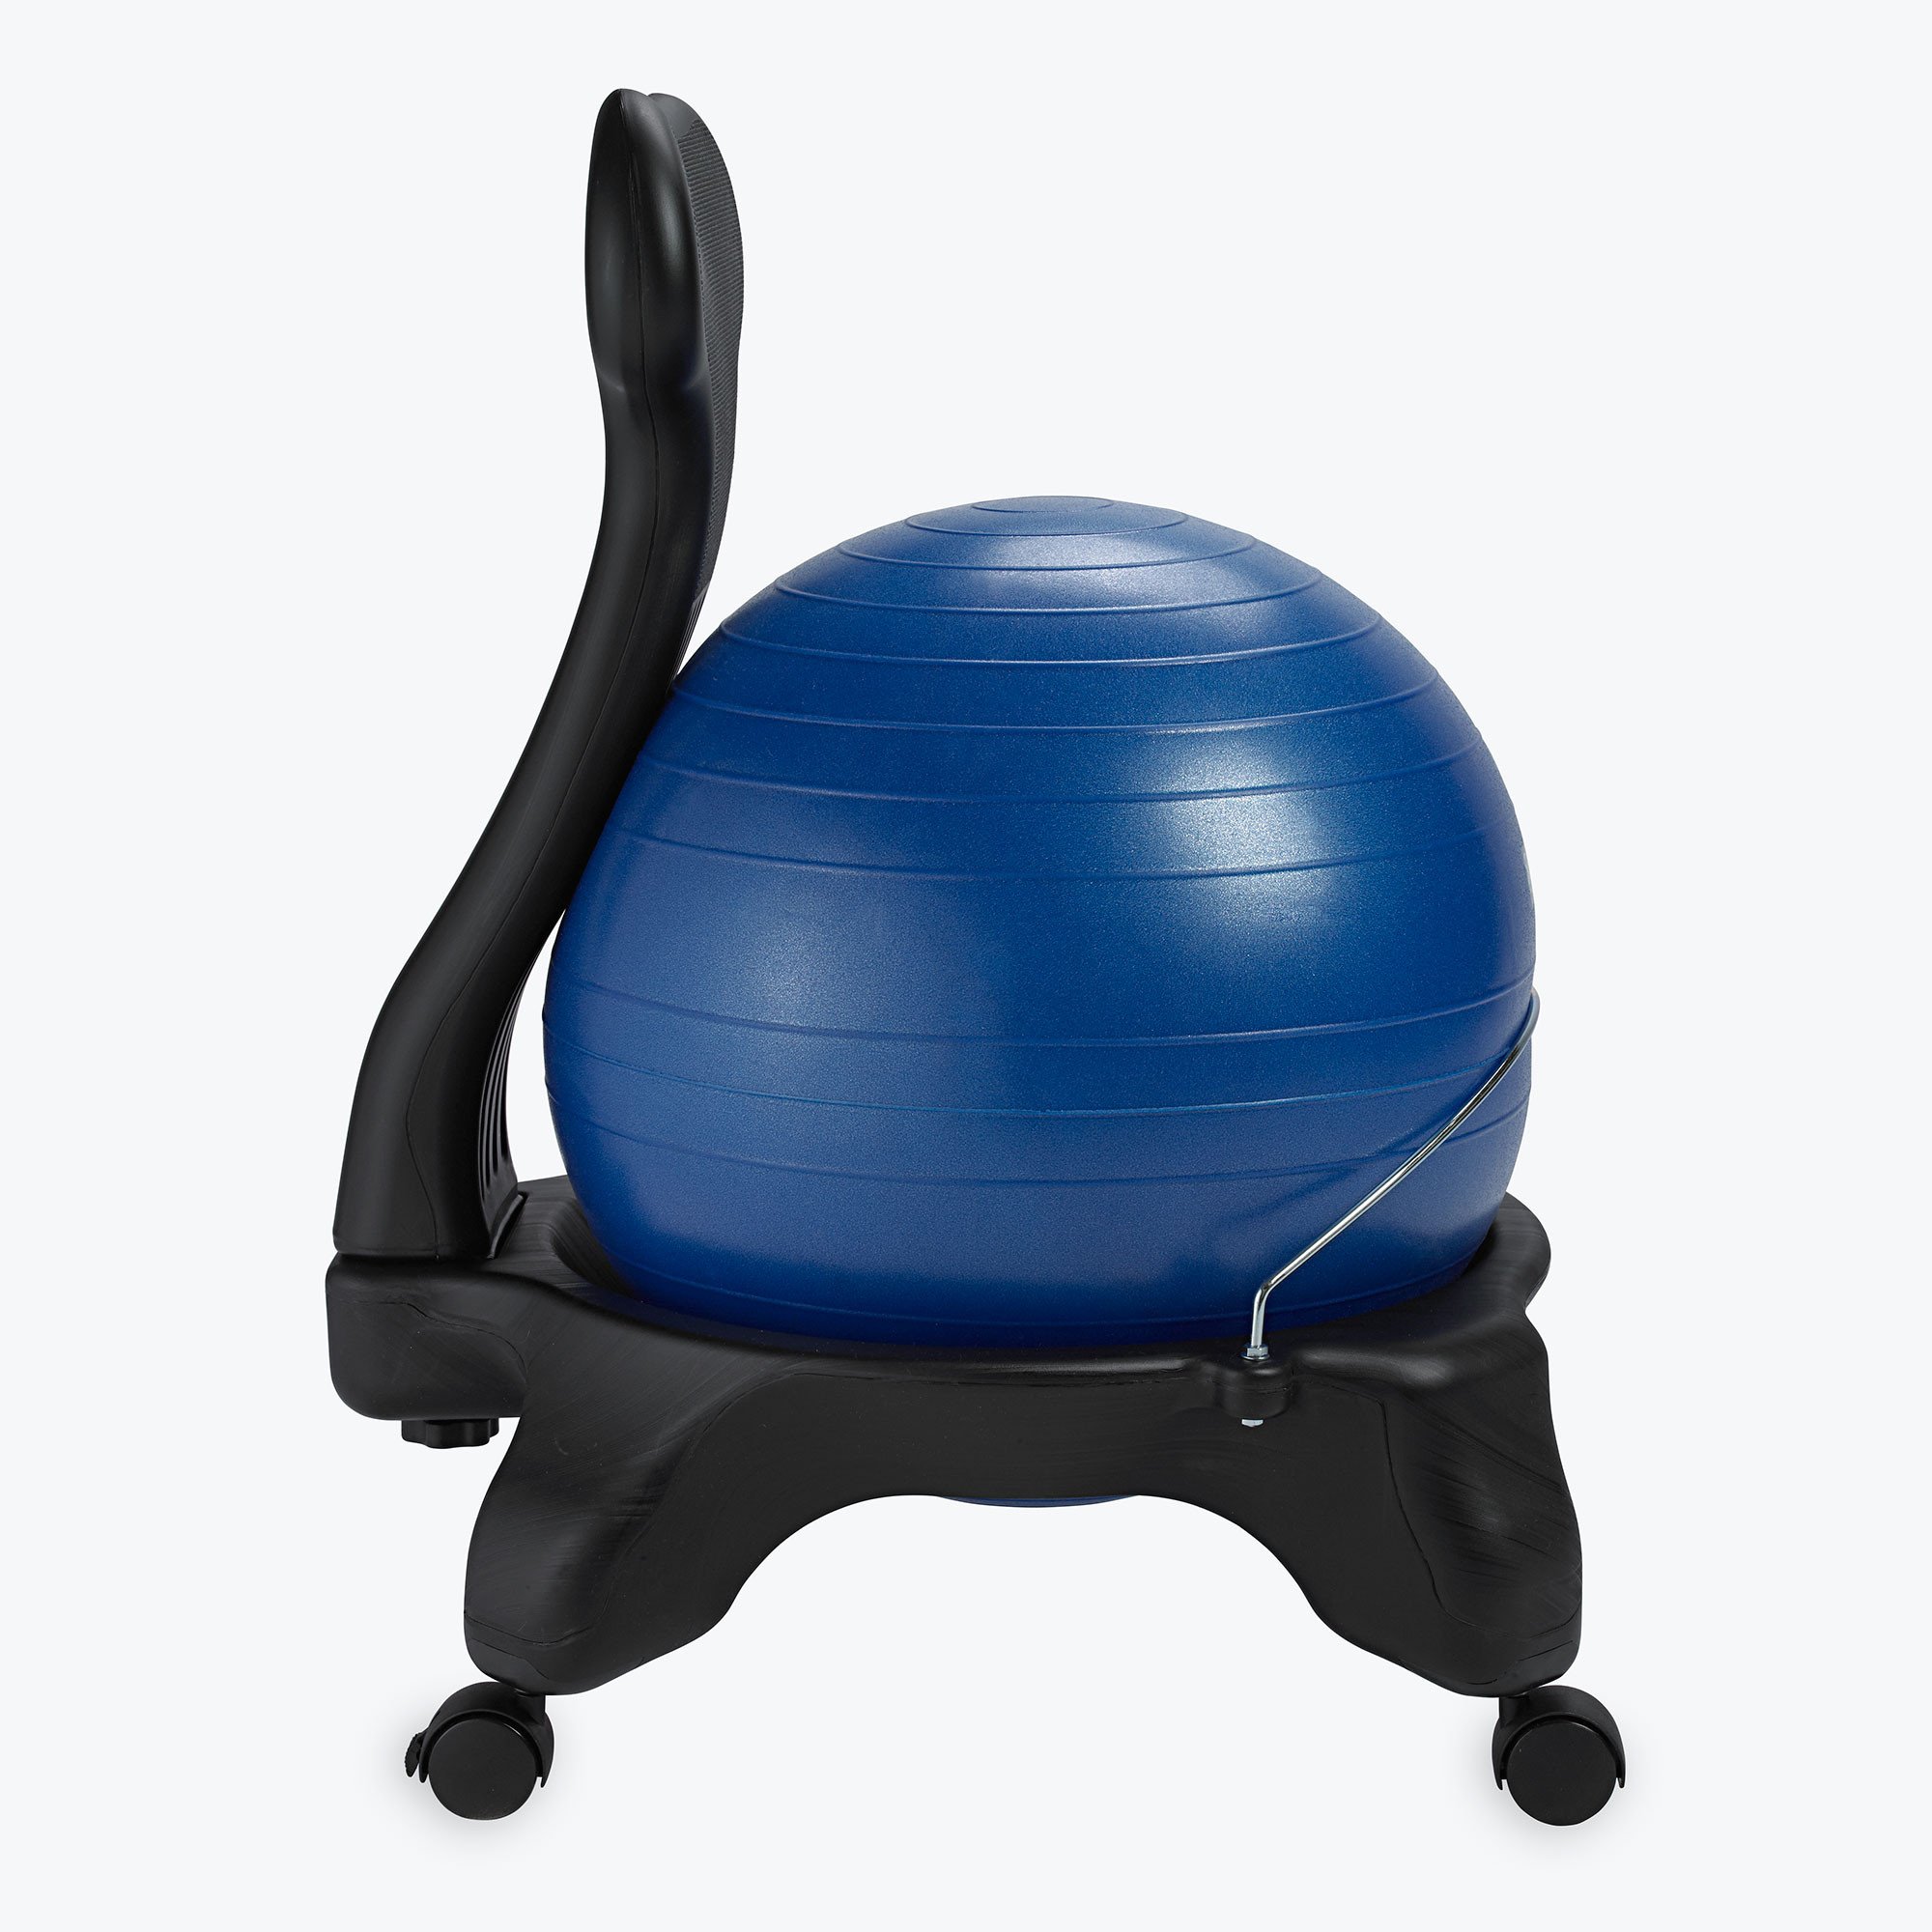 The girl that does the Staples and Costco runs needs to have an itemized list approved by management before shopping runs. Because one day I wanted an electronic 3 hole punch and a bouncy ball chair. And I fucking got them.